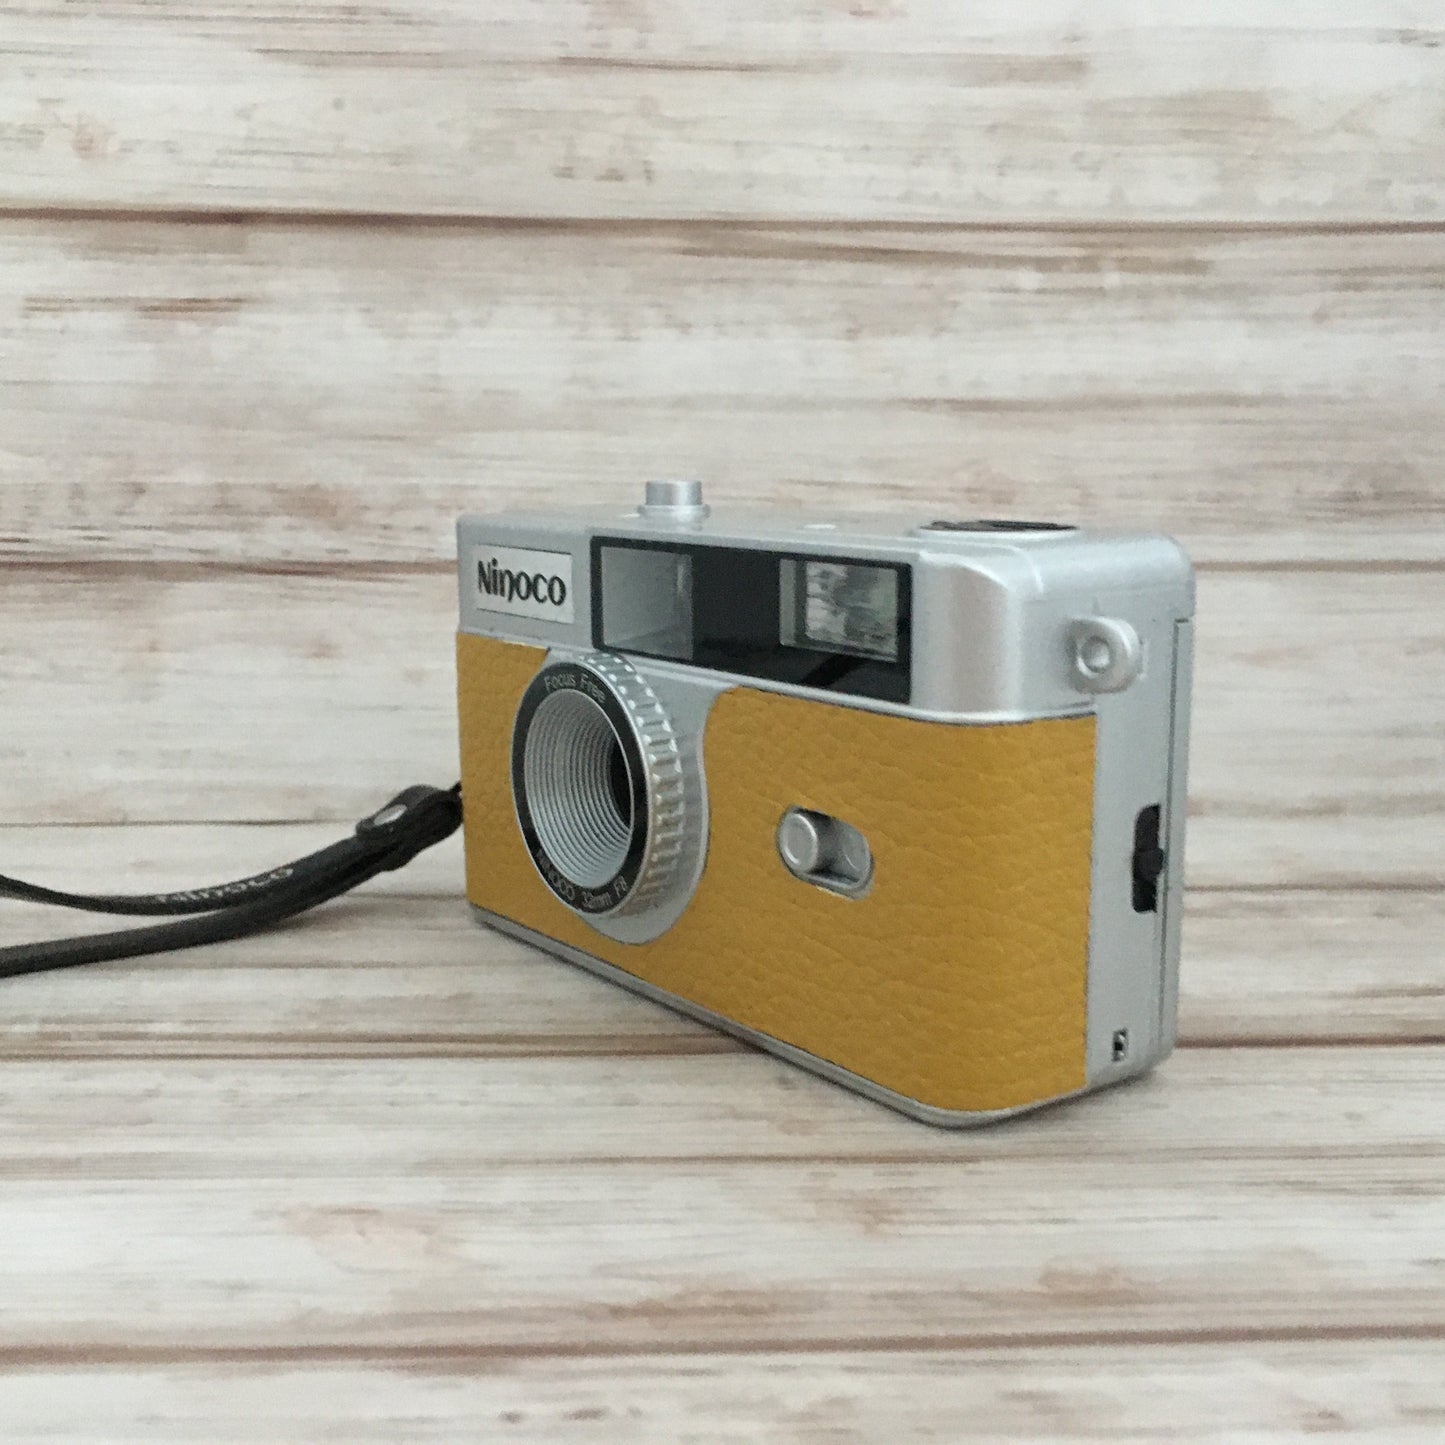 Point & shoot ! Brand new 35mm film camera with mustard yellow leather